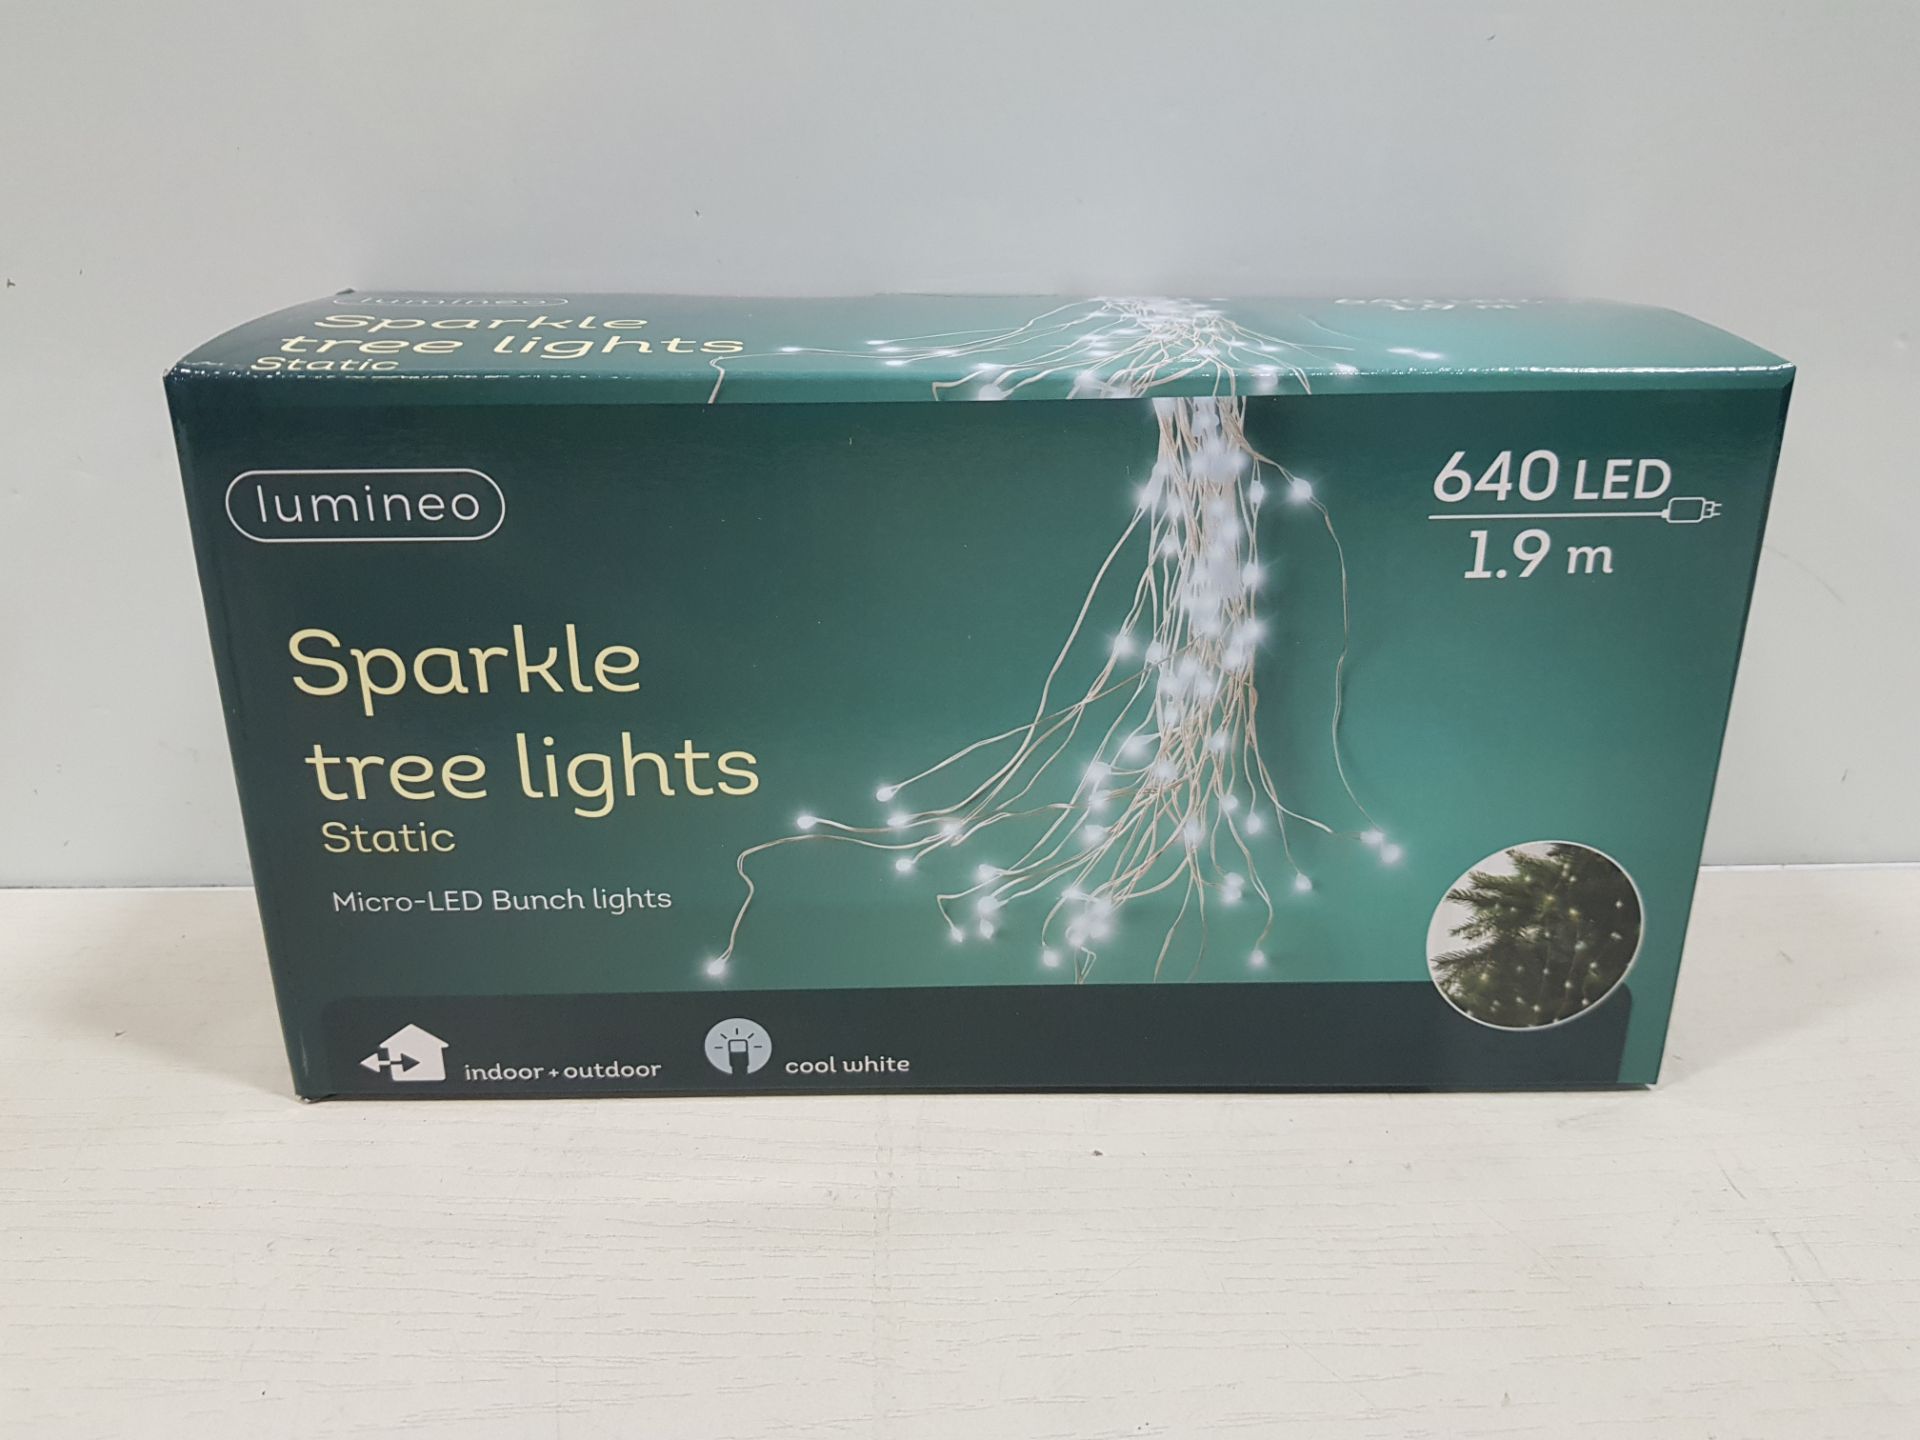 20 X LUMINEO 640 LED SPARKLE TREE LIGHTS - STATIC- MICRO LED BUNCH LIGHTS - IN COOL WHITE